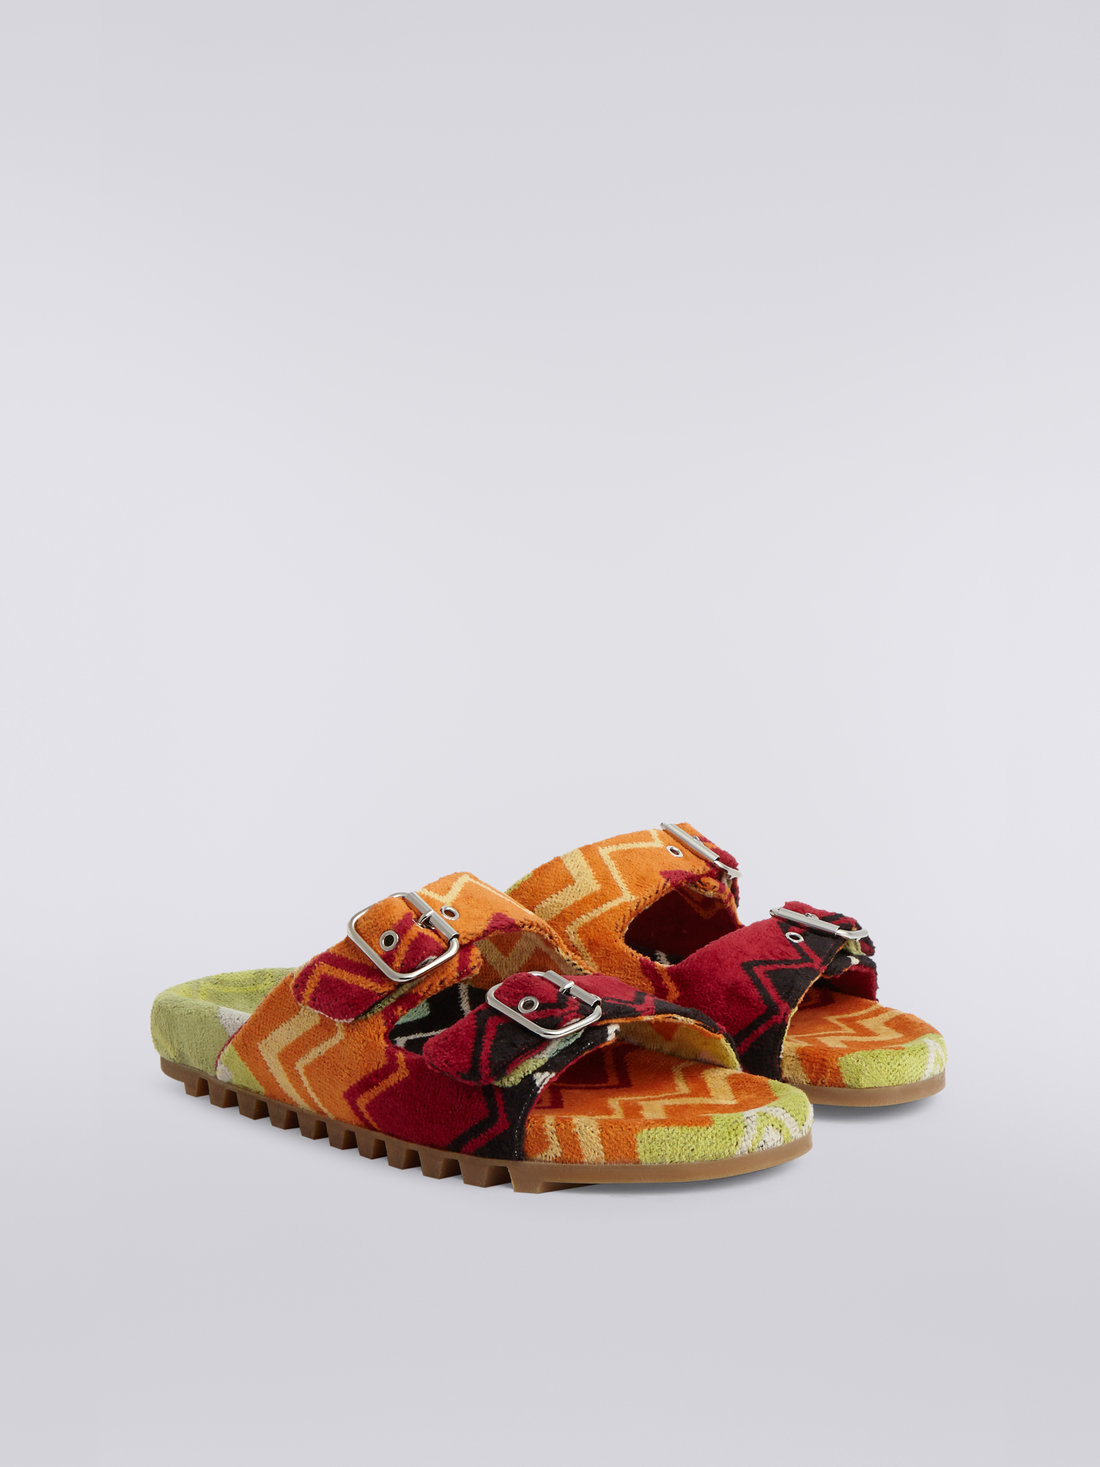 Double zigzag foam sandals, Multicoloured  - OS23SY01BV00BVSM8MS - 1